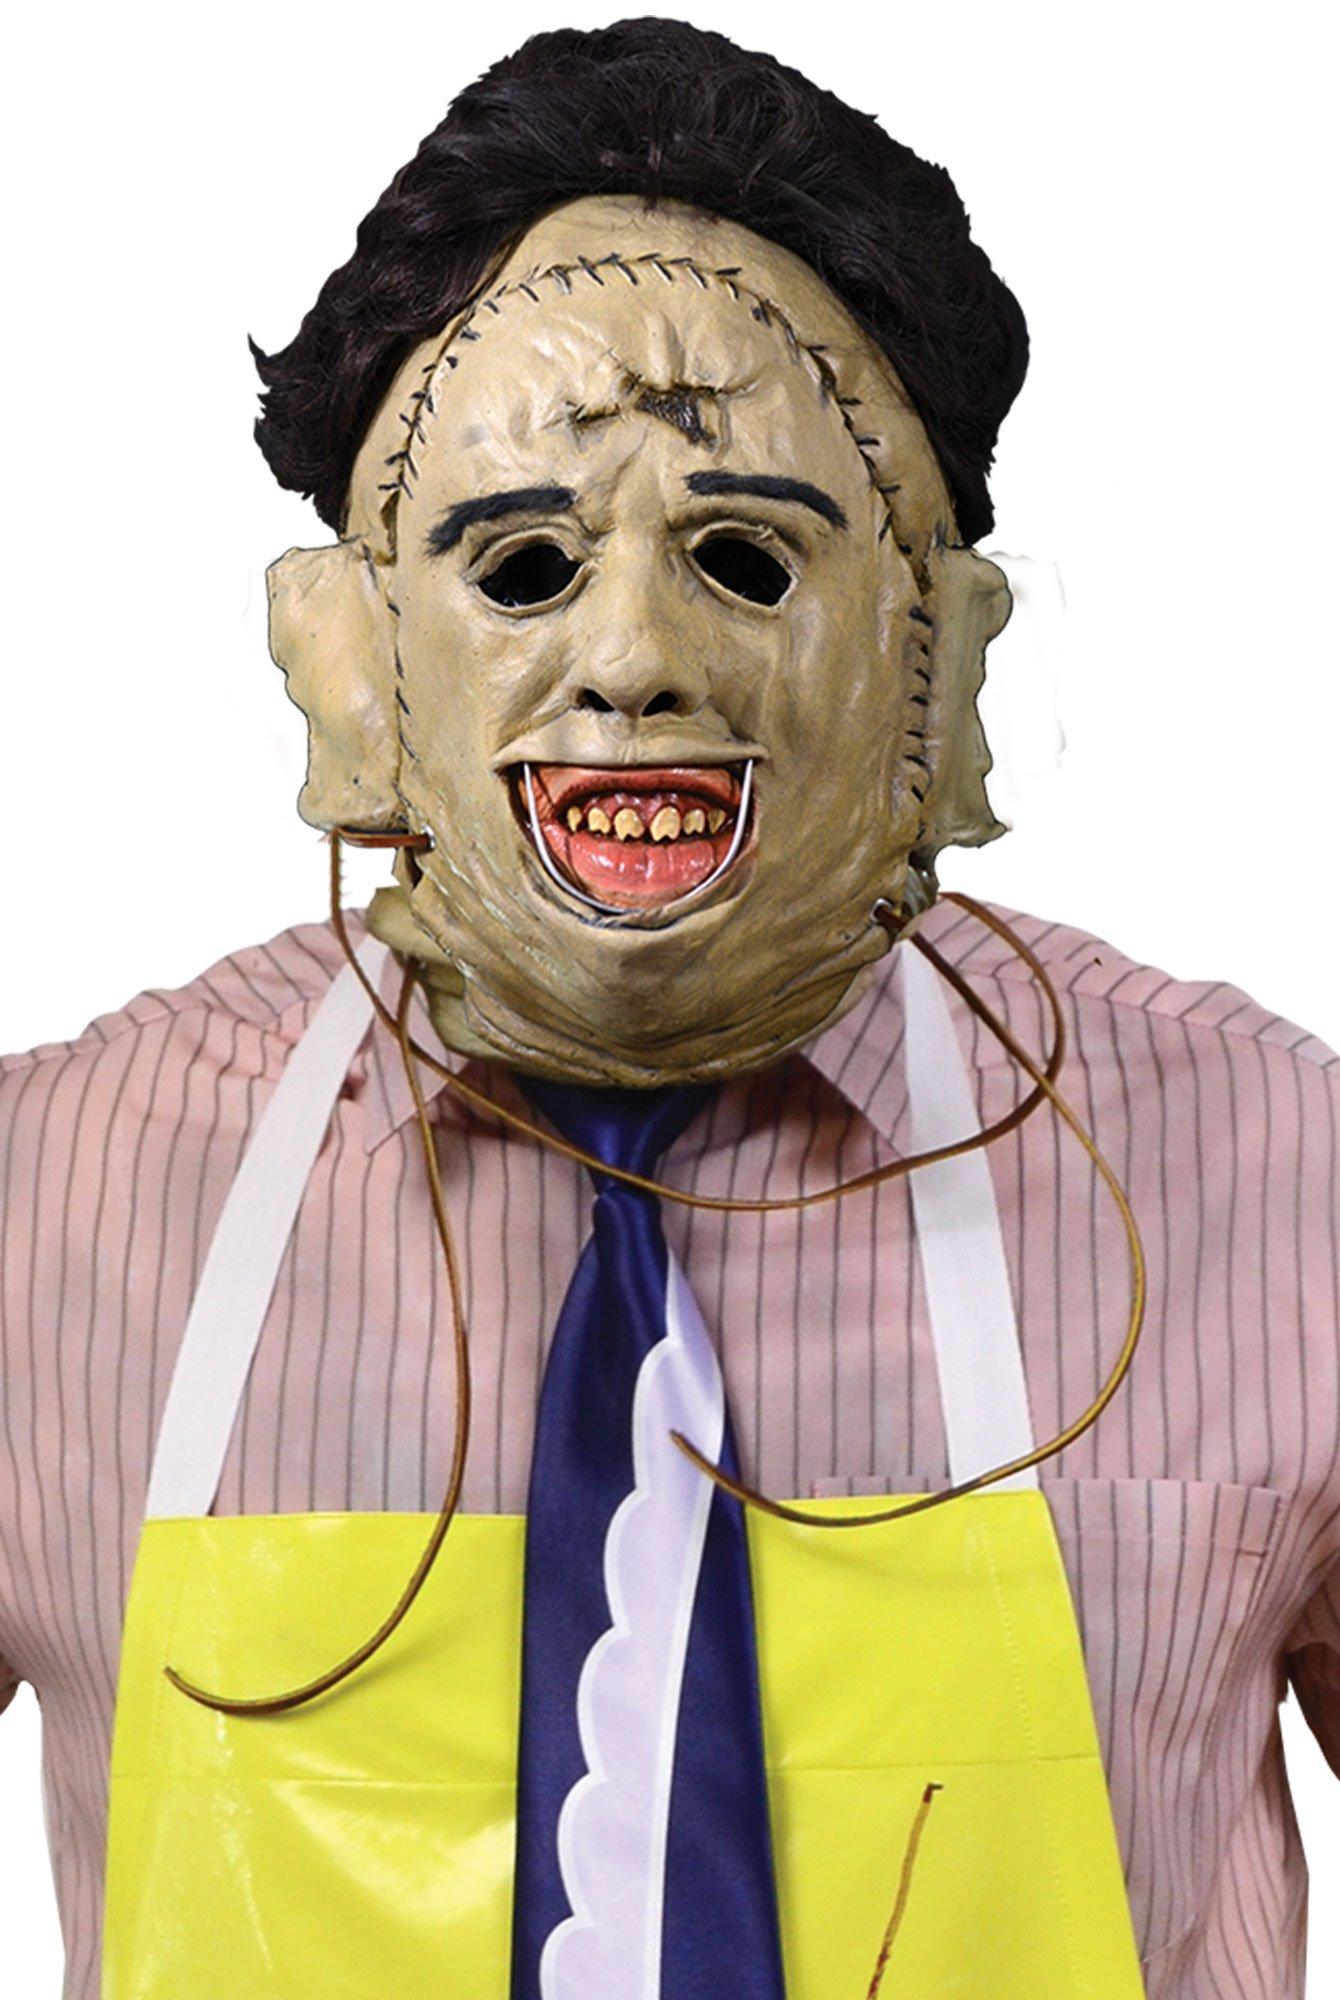 Adult Leatherface Costume - The Texas Chainsaw Massacre